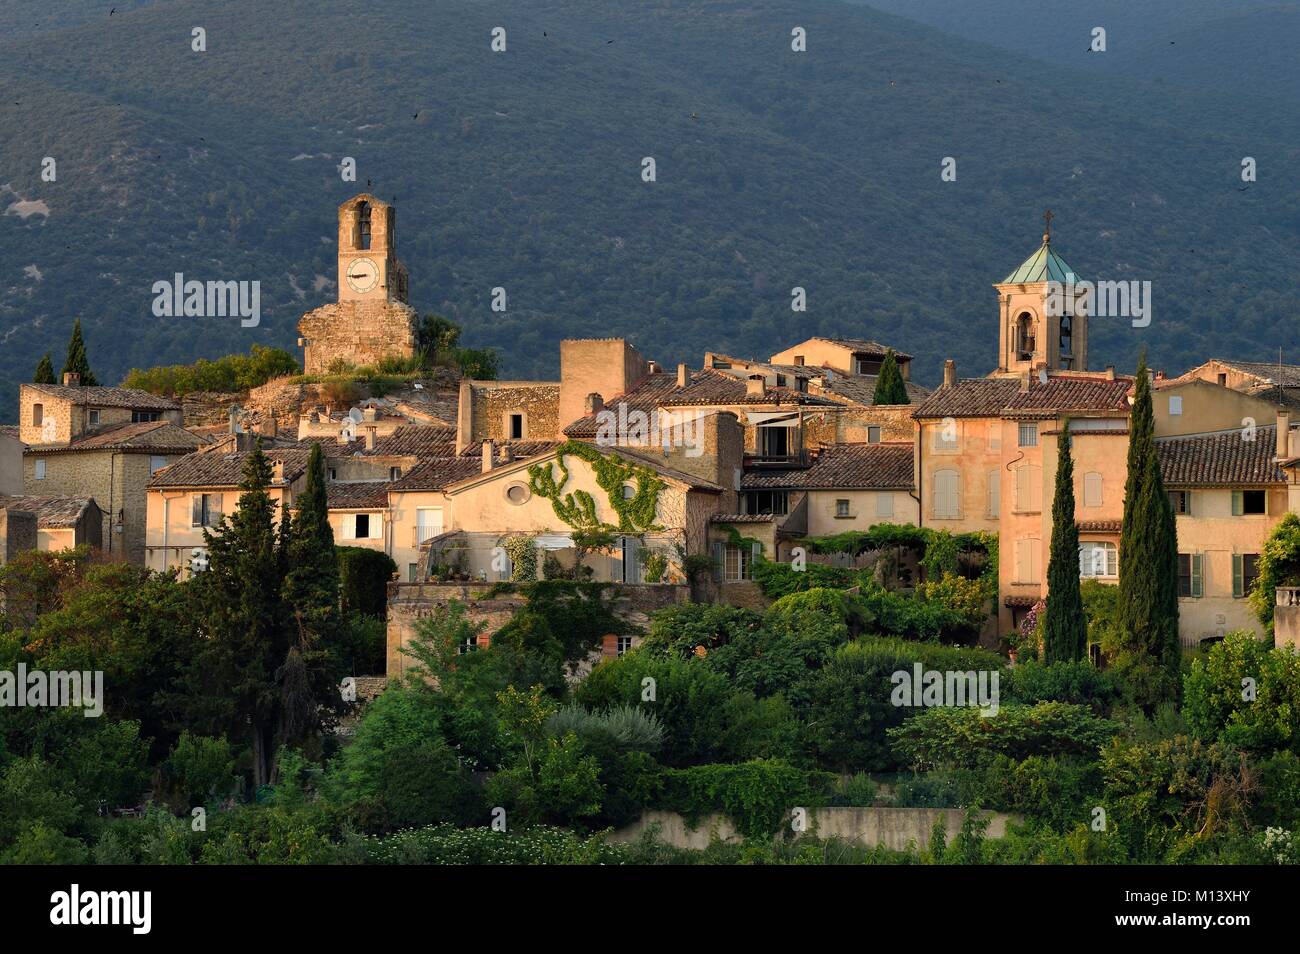 France, Vaucluse, Parc Naturel Regional du Luberon (Natural Regional Park of Luberon), Lourmarin, labelled Les Plus Beaux Villages de France (The Most Beautiful Villages of France), the clock tower and the church bell tower, the massif of Luberon in background Stock Photo